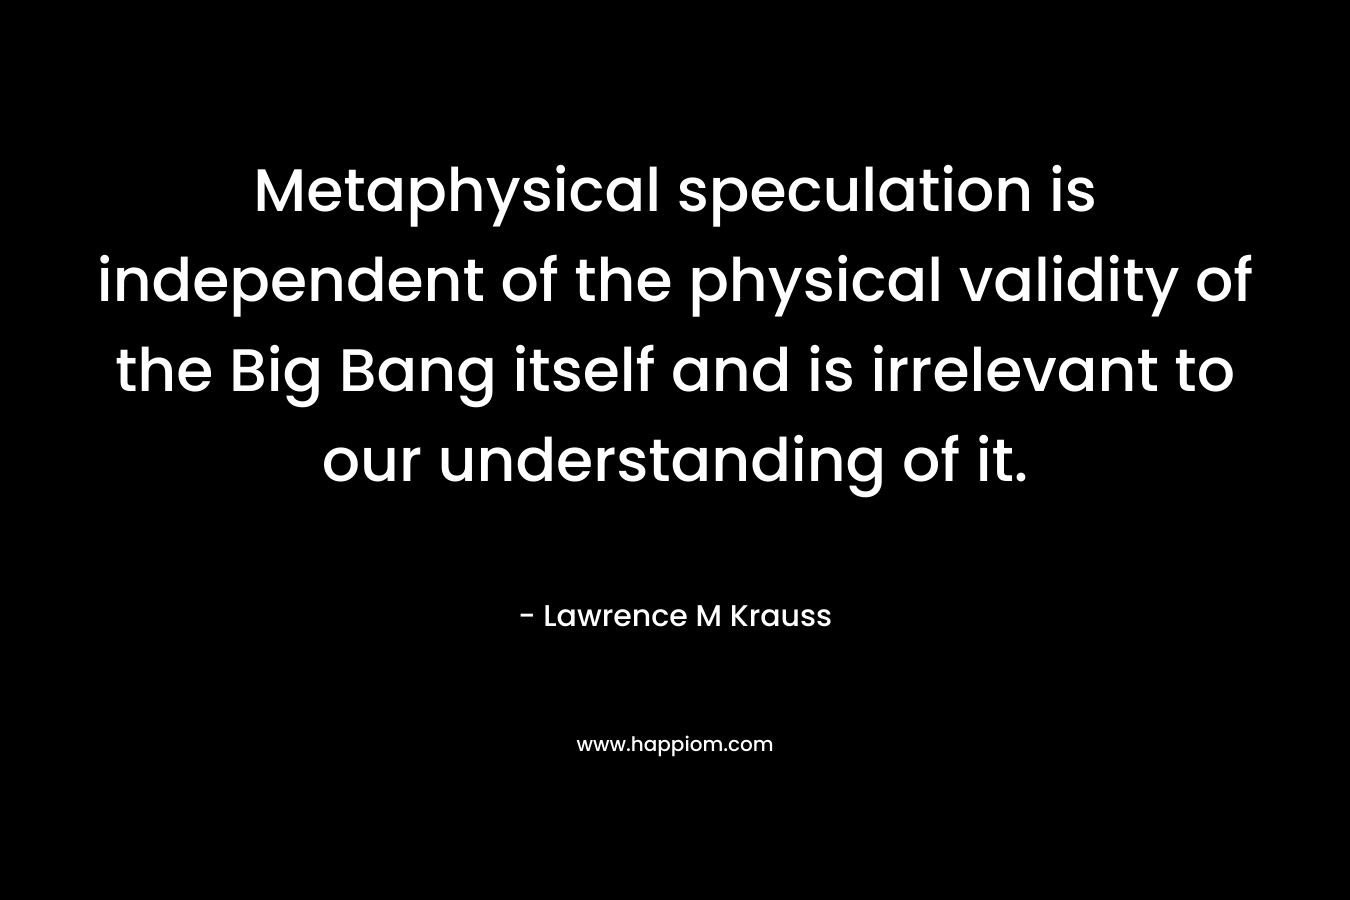 Metaphysical speculation is independent of the physical validity of the Big Bang itself and is irrelevant to our understanding of it.